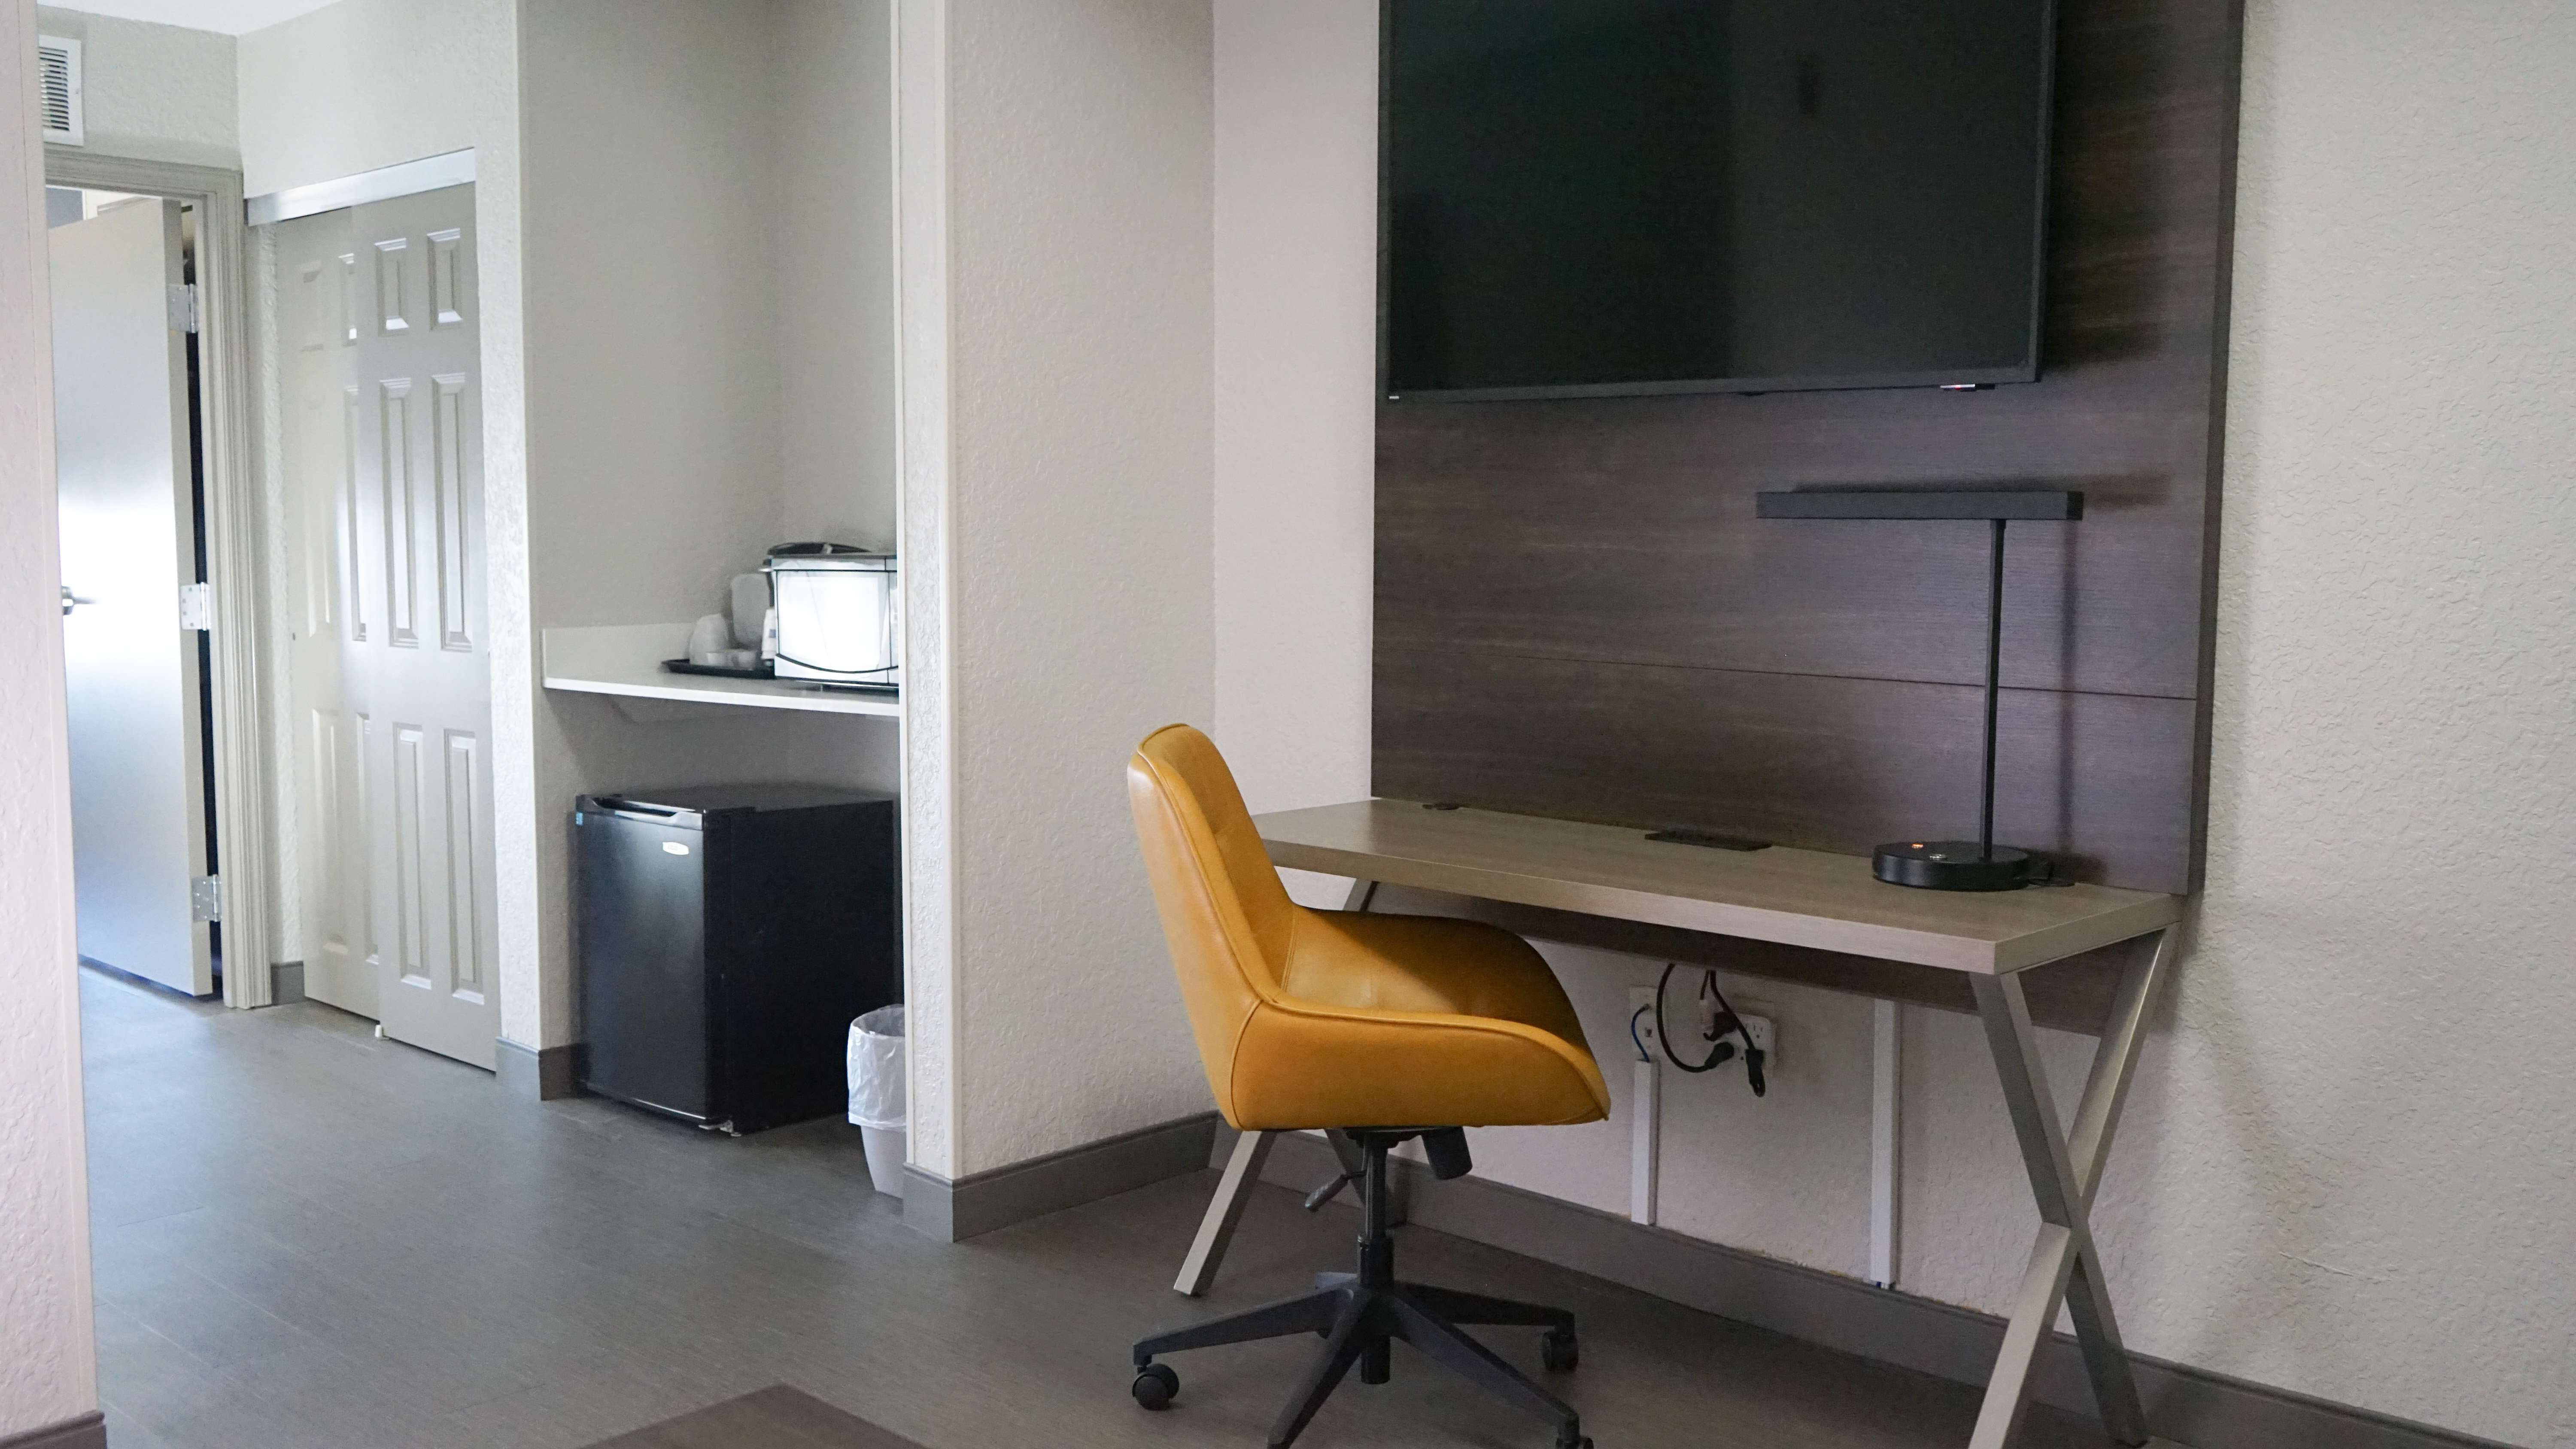 Rest easy in our spacious suite rooms with functional workspace. 